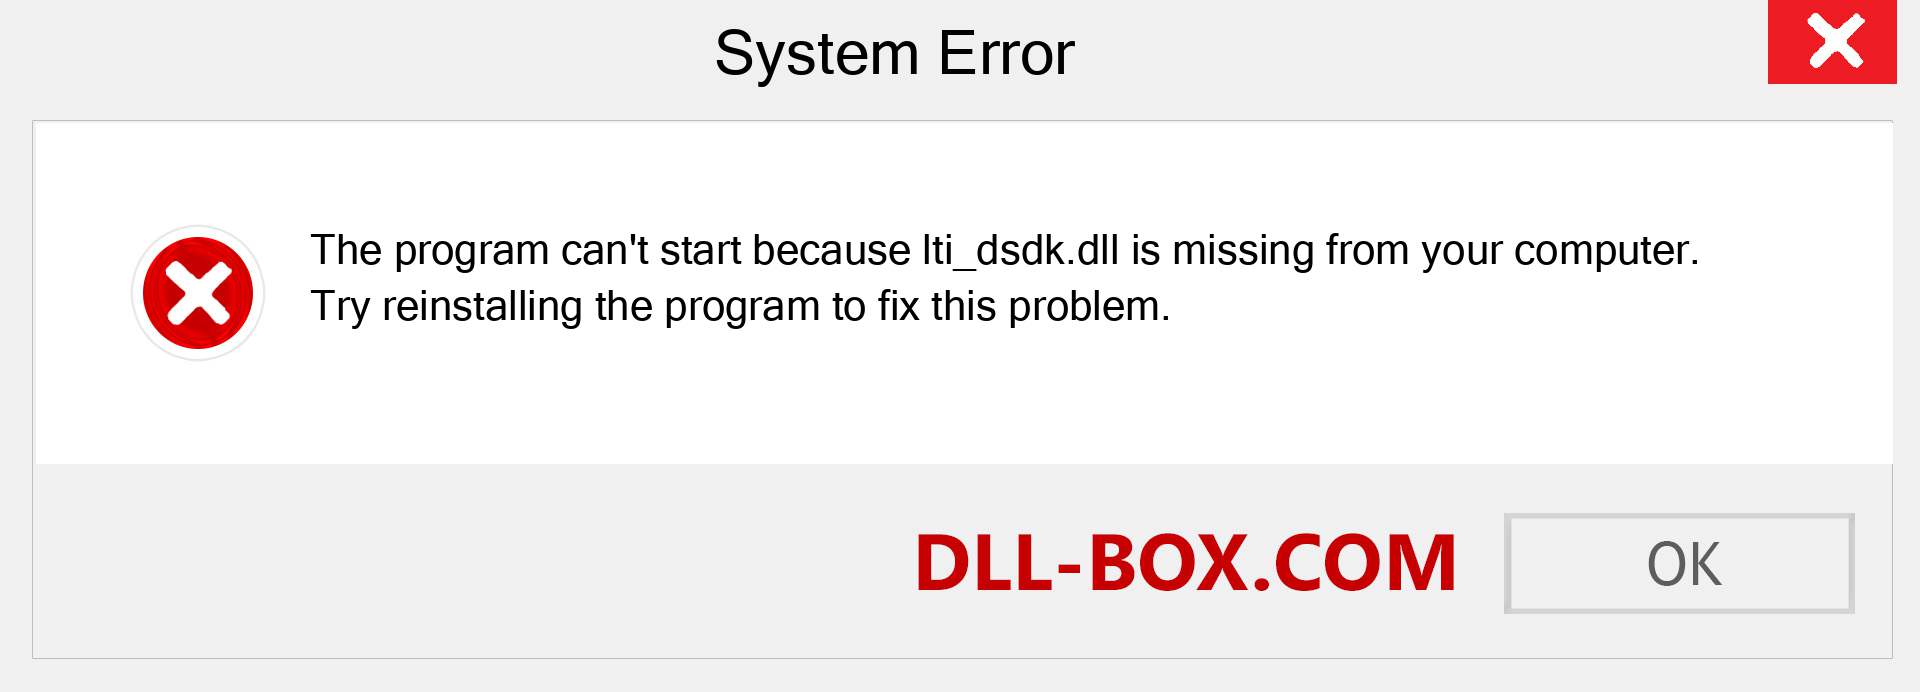  lti_dsdk.dll file is missing?. Download for Windows 7, 8, 10 - Fix  lti_dsdk dll Missing Error on Windows, photos, images